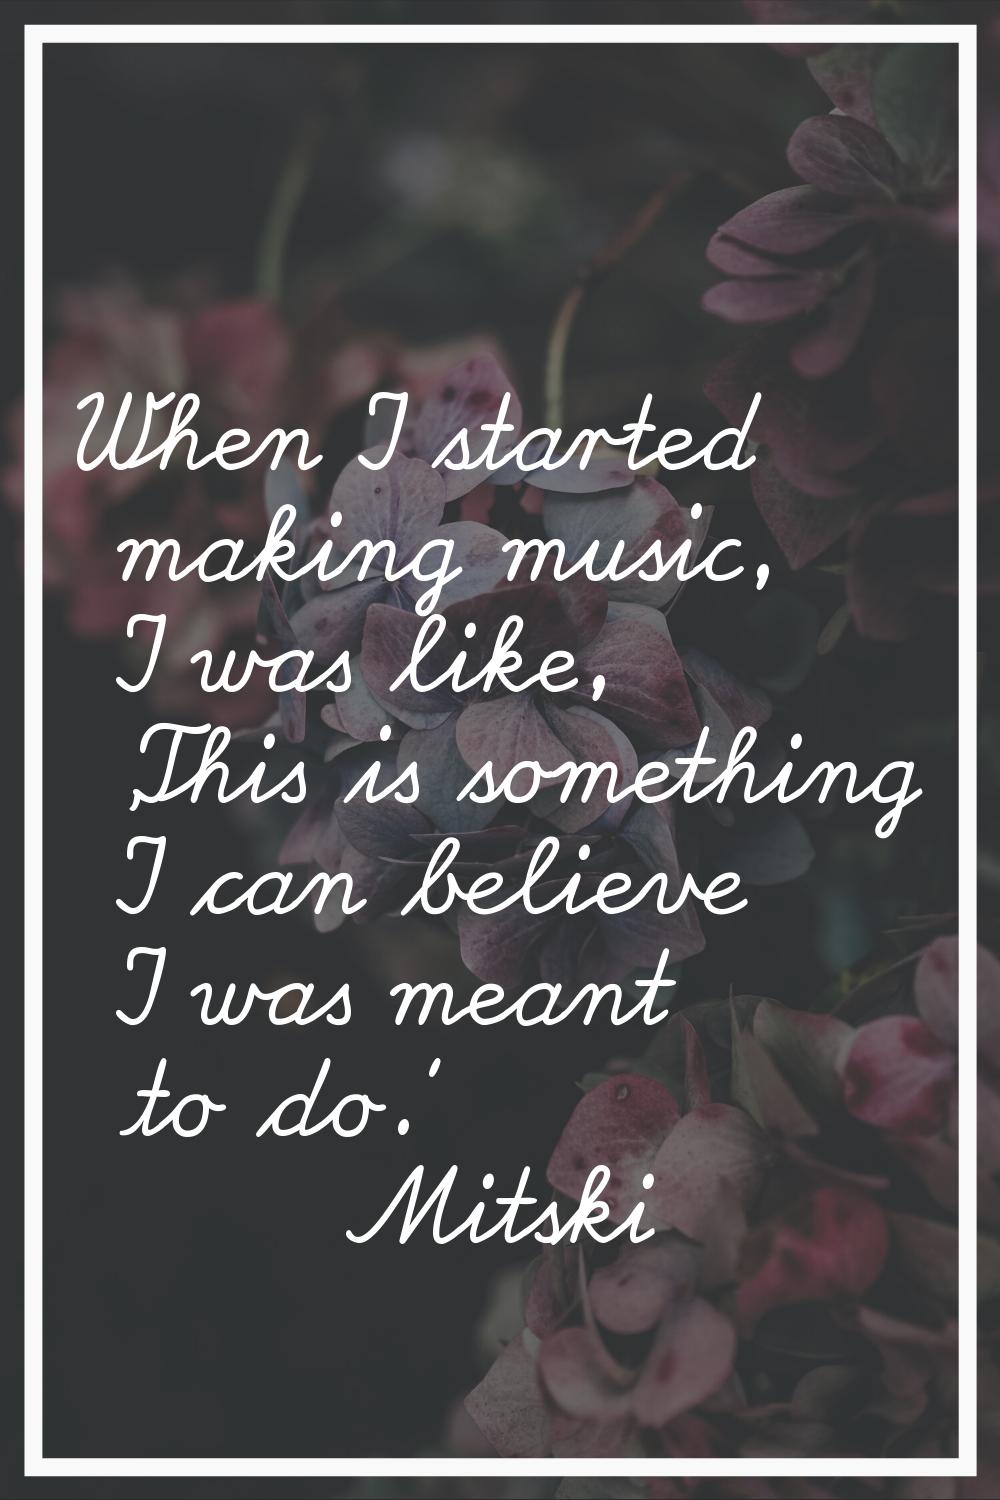 When I started making music, I was like, 'This is something I can believe I was meant to do.'